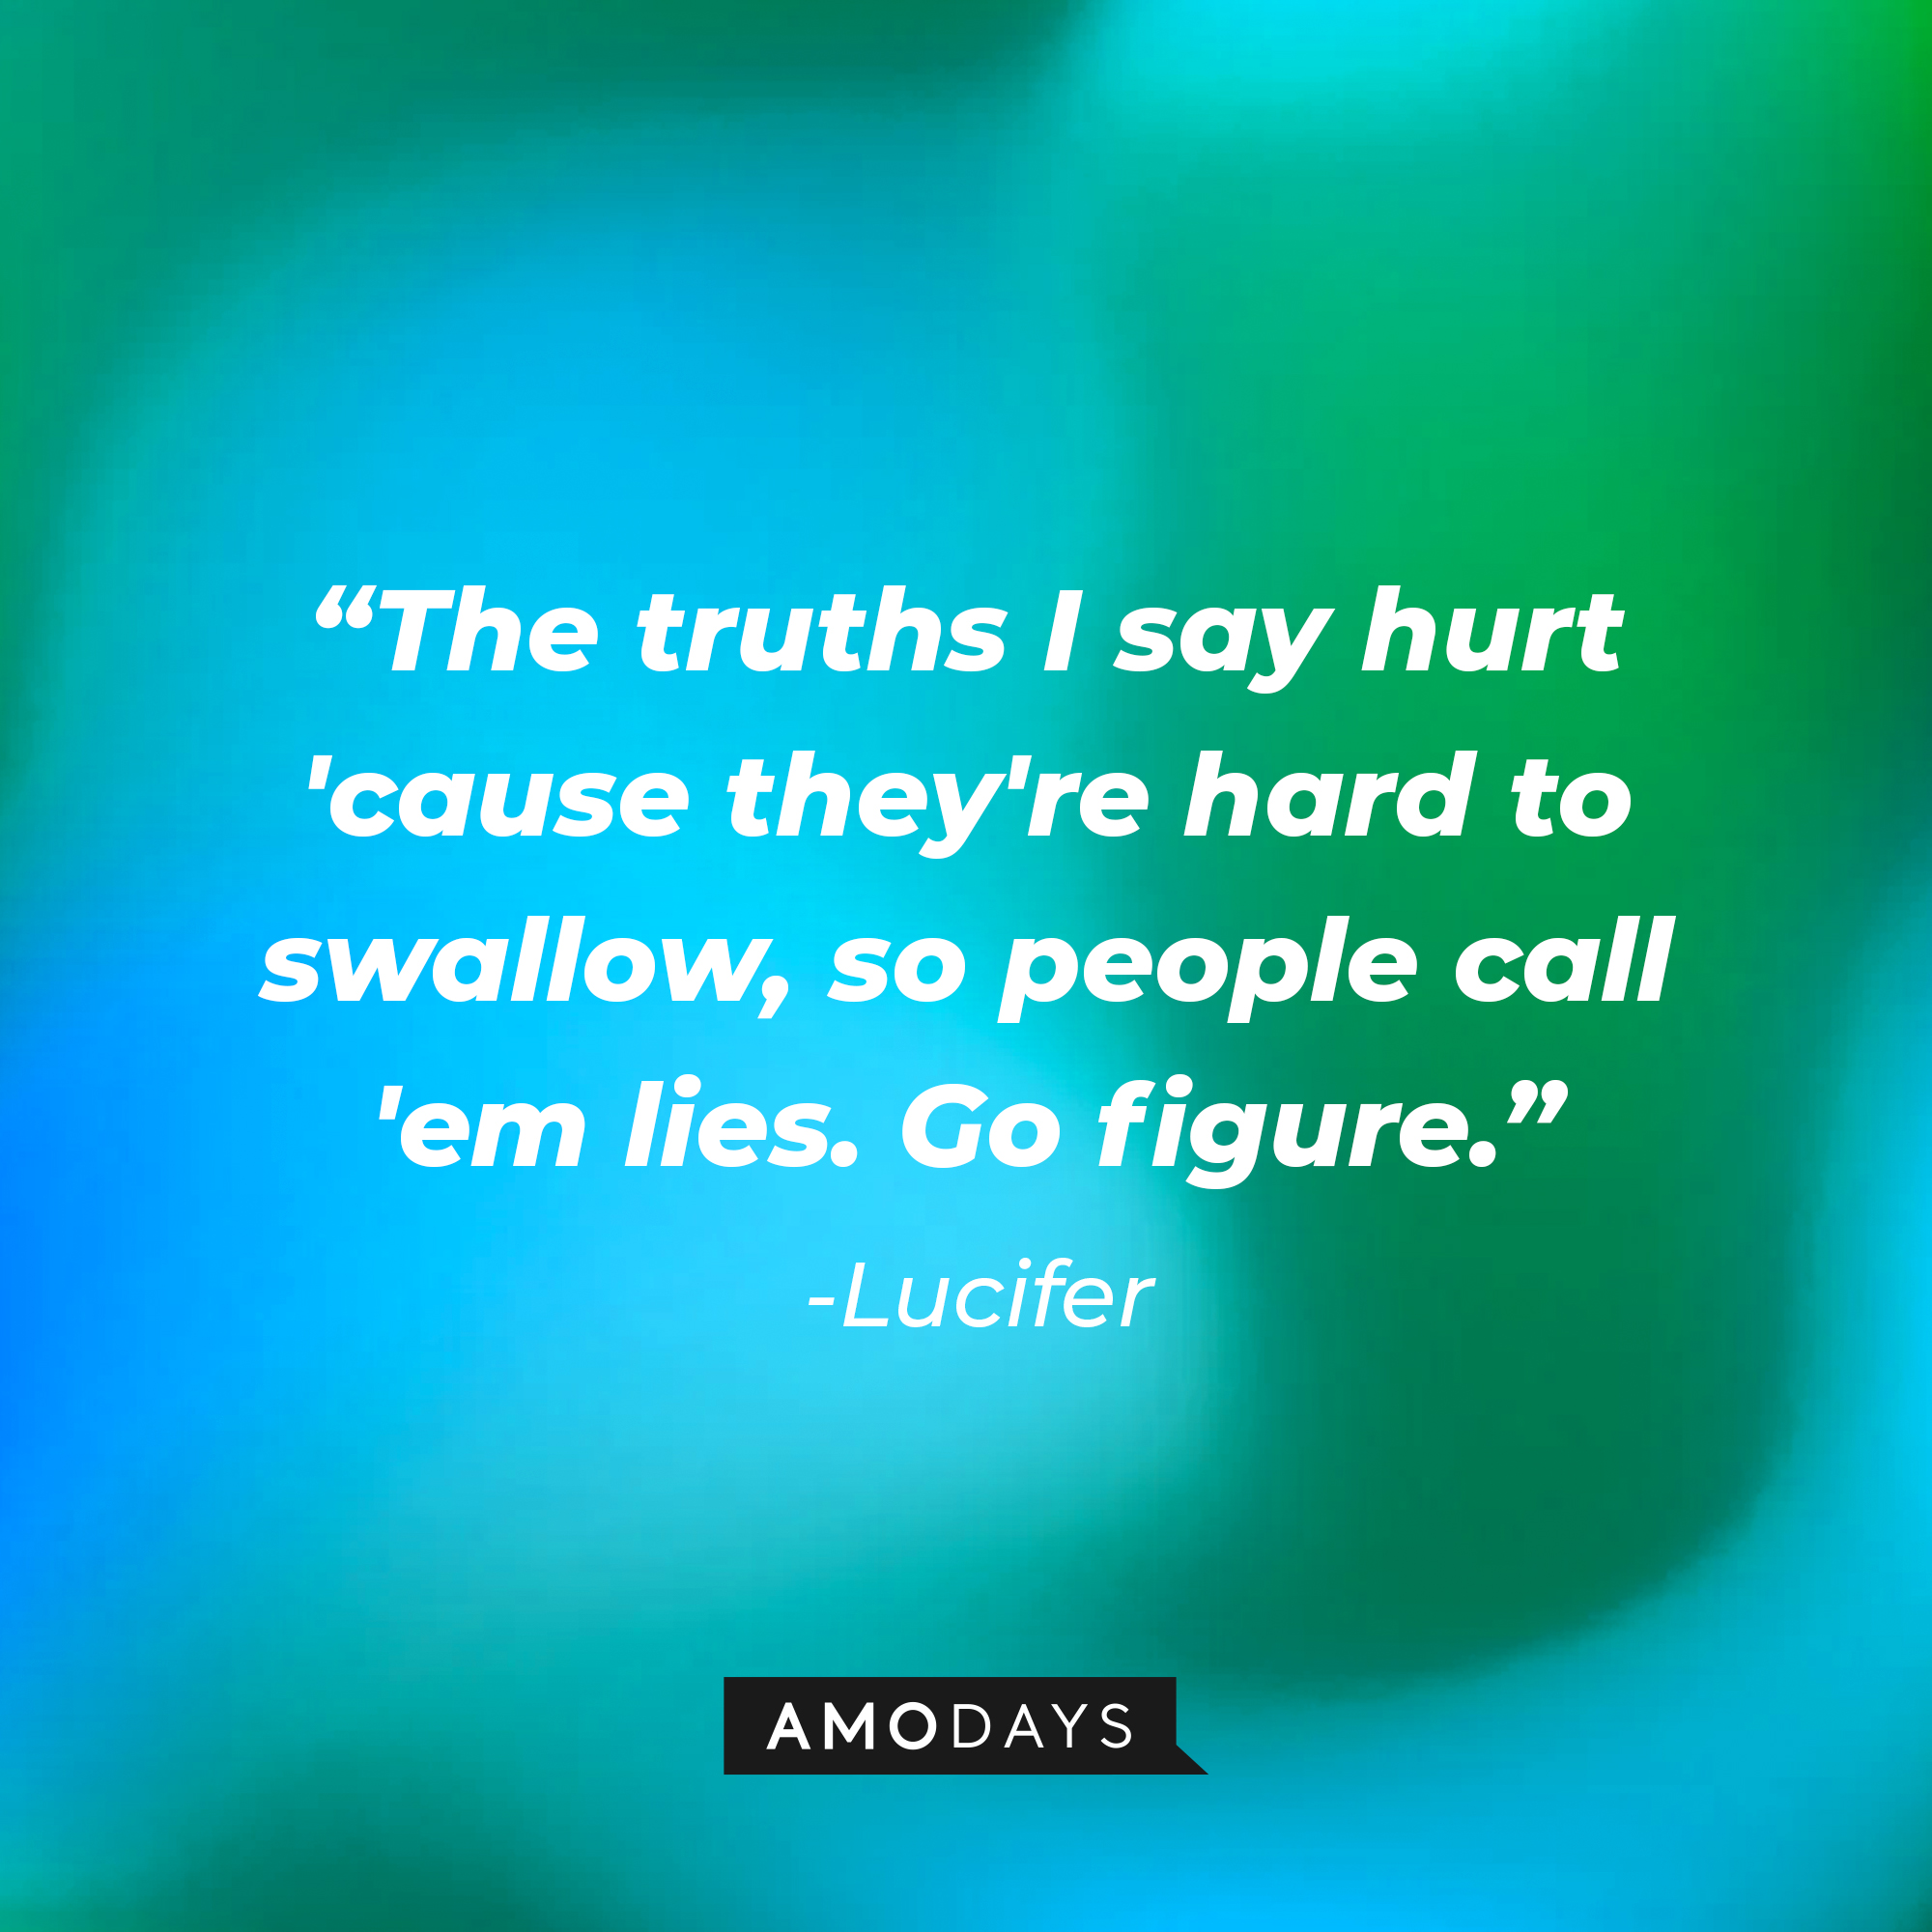 Lucifer’s quote: “The truths I say hurt 'cause they're hard to swallow, so people call 'em lies. Go figure." | Source: AmoDays